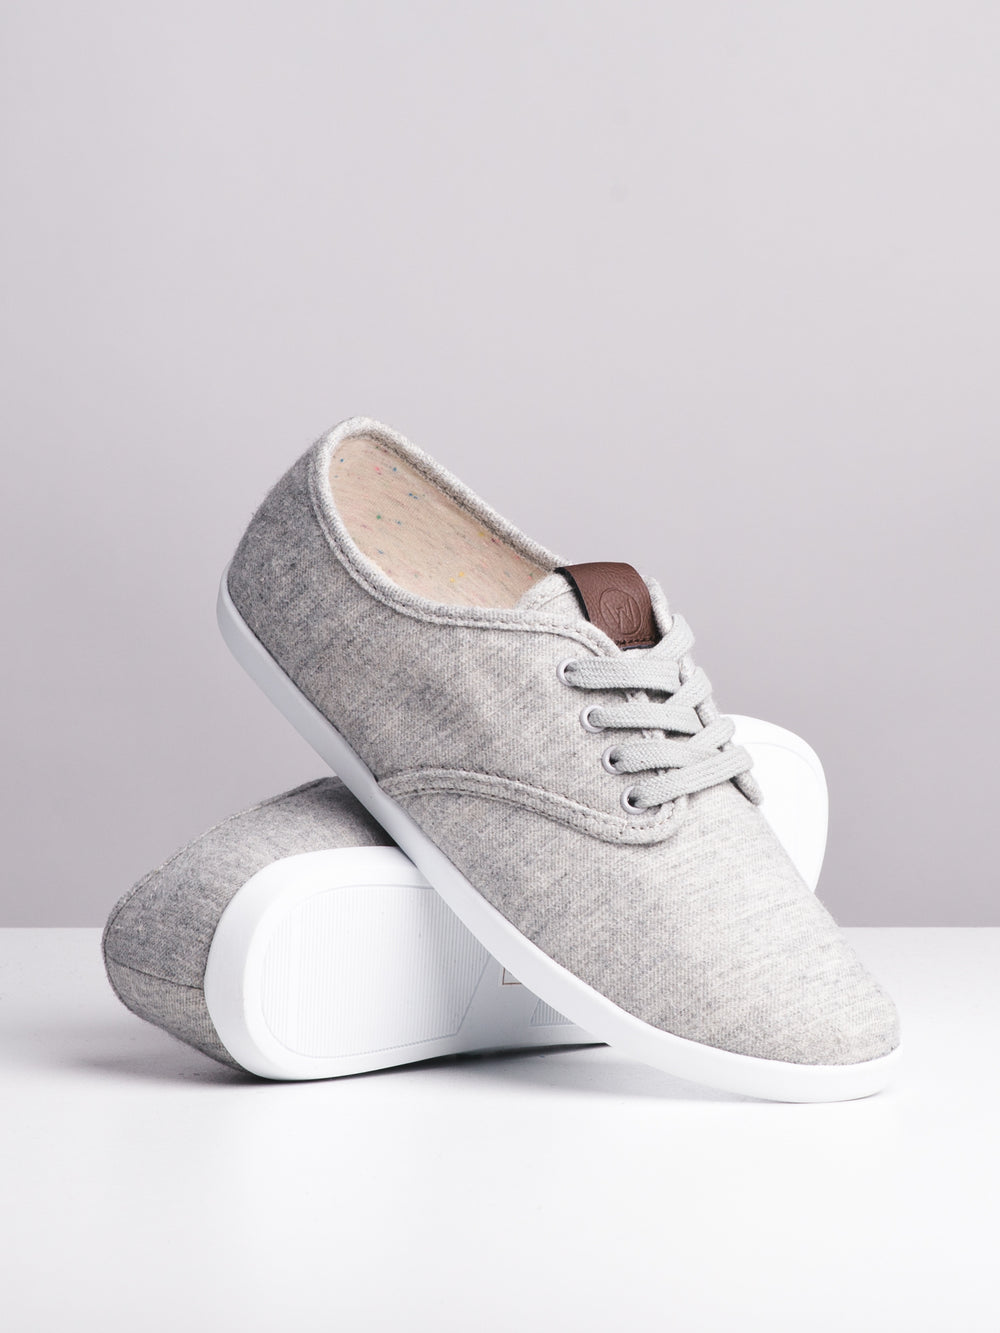 WOMENS WILLA - GREY-D4 - CLEARANCE